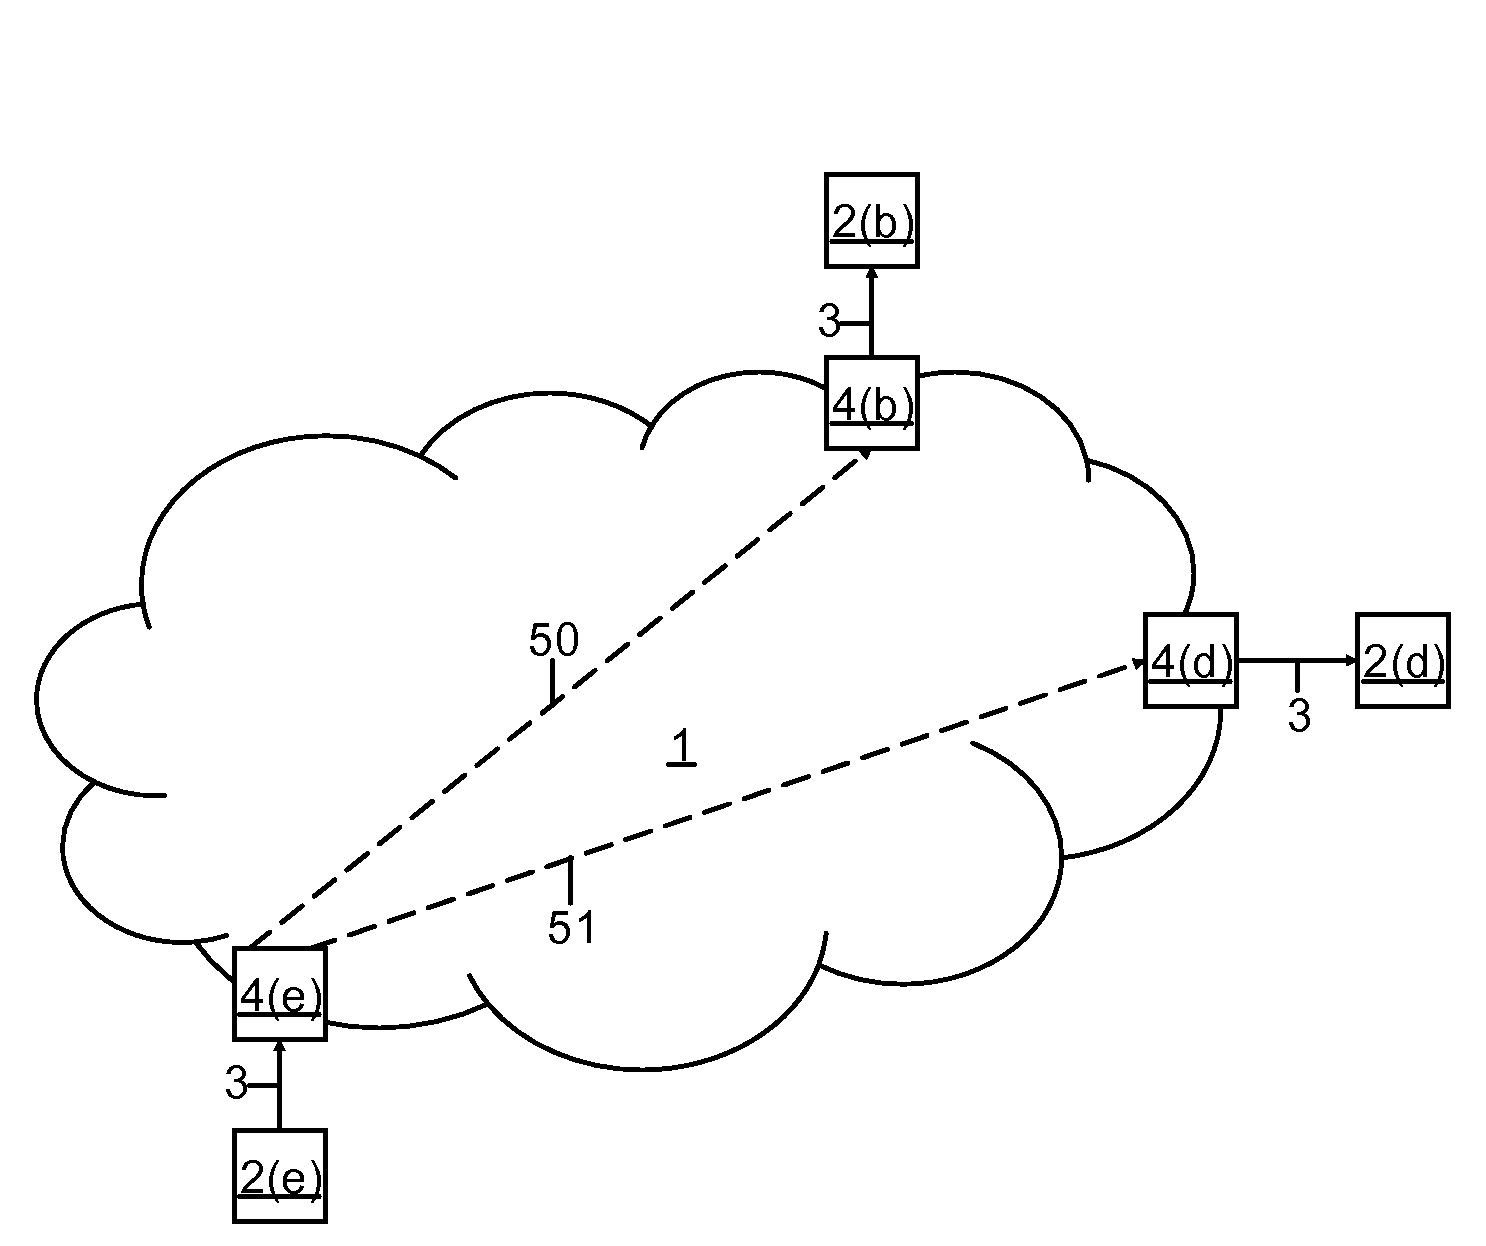 Transparent, look-up-free packet forwarding method for optimizing global network throughput based on real-time route status